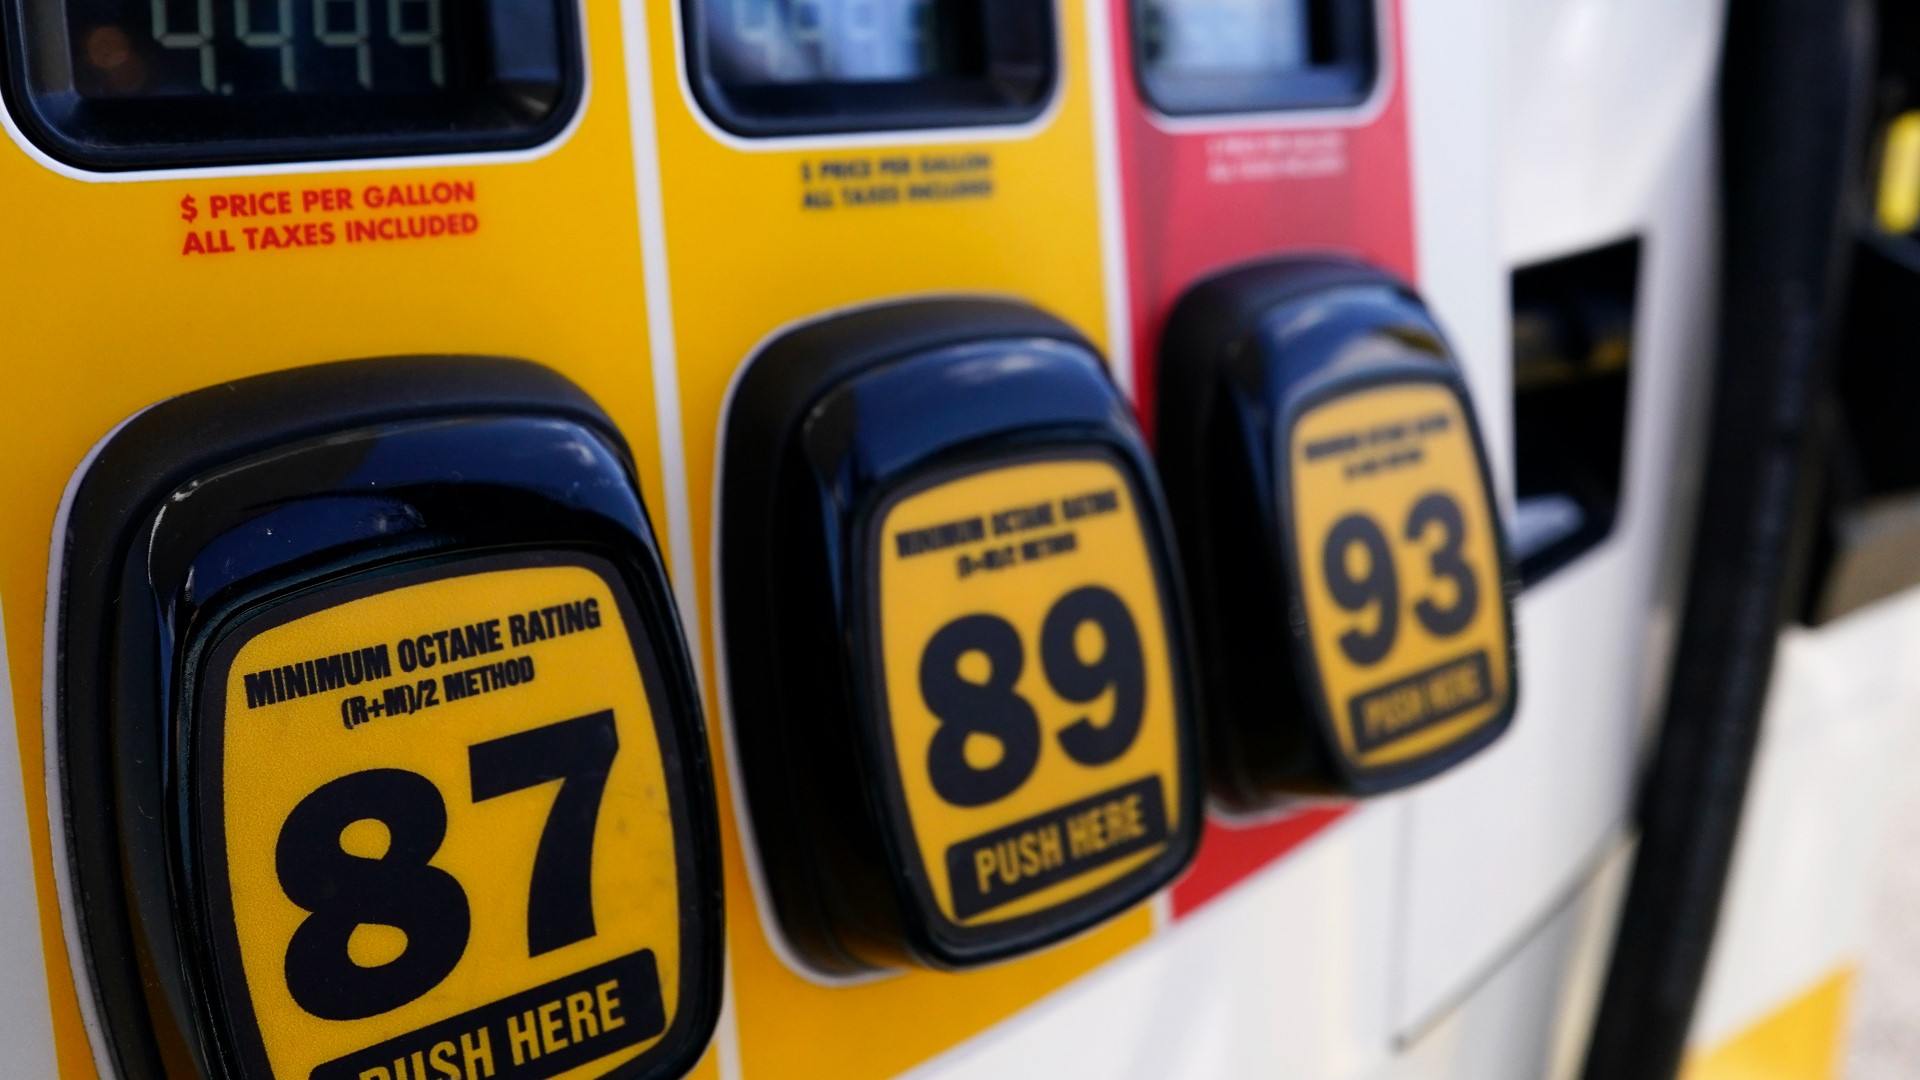 Gas prices continue to skyrocket across the U.S.